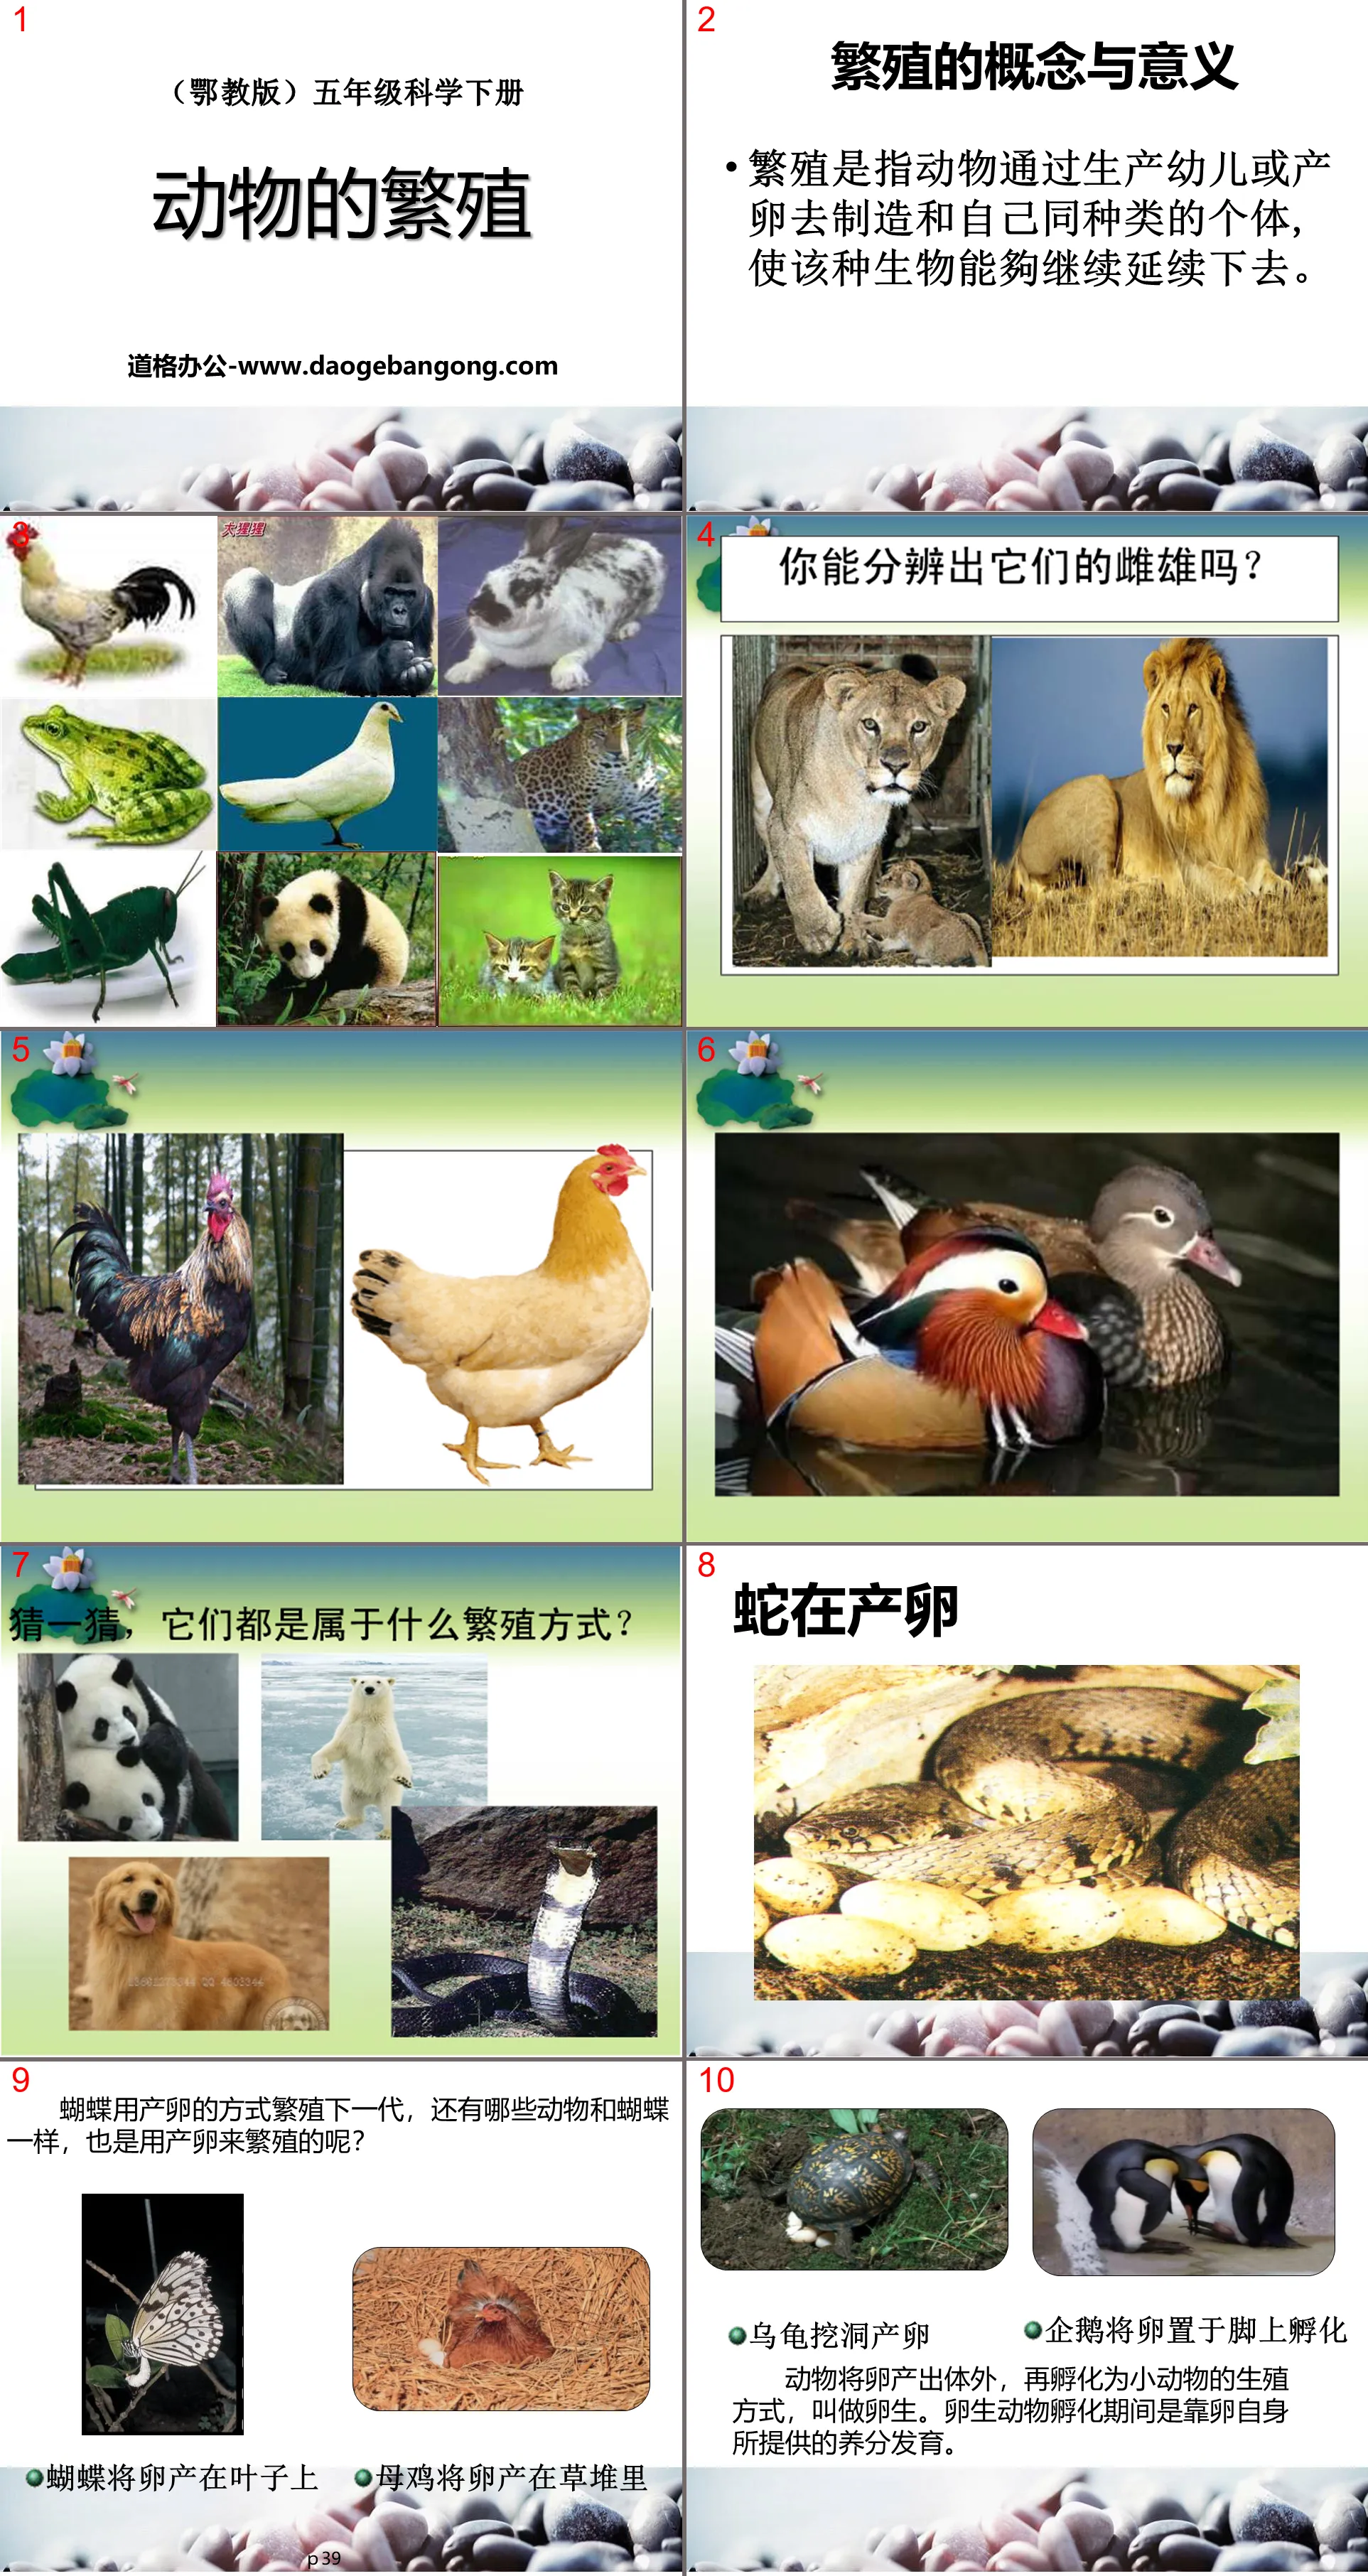 "Animal Reproduction" PPT courseware